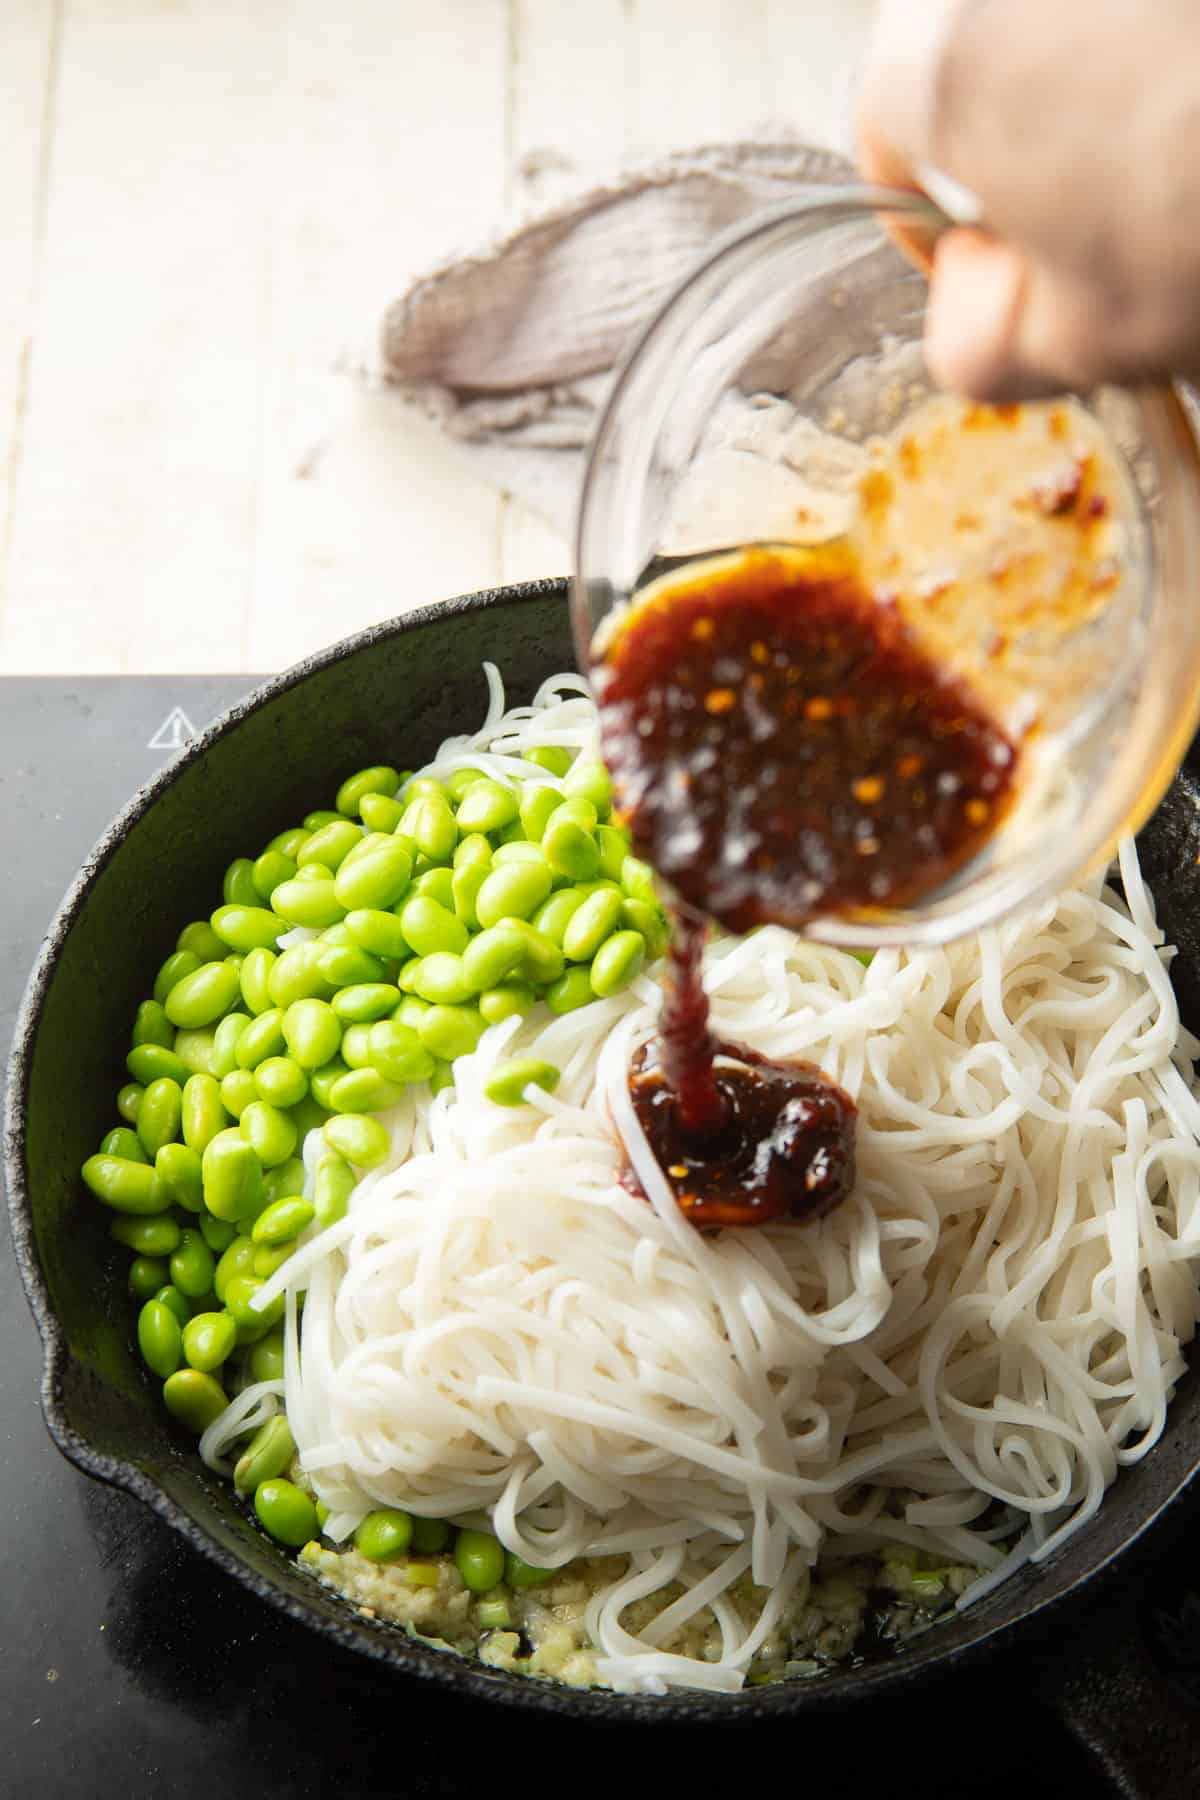 Hand pouring chili garlic sauce into a skillet filled with noodles and edamame.